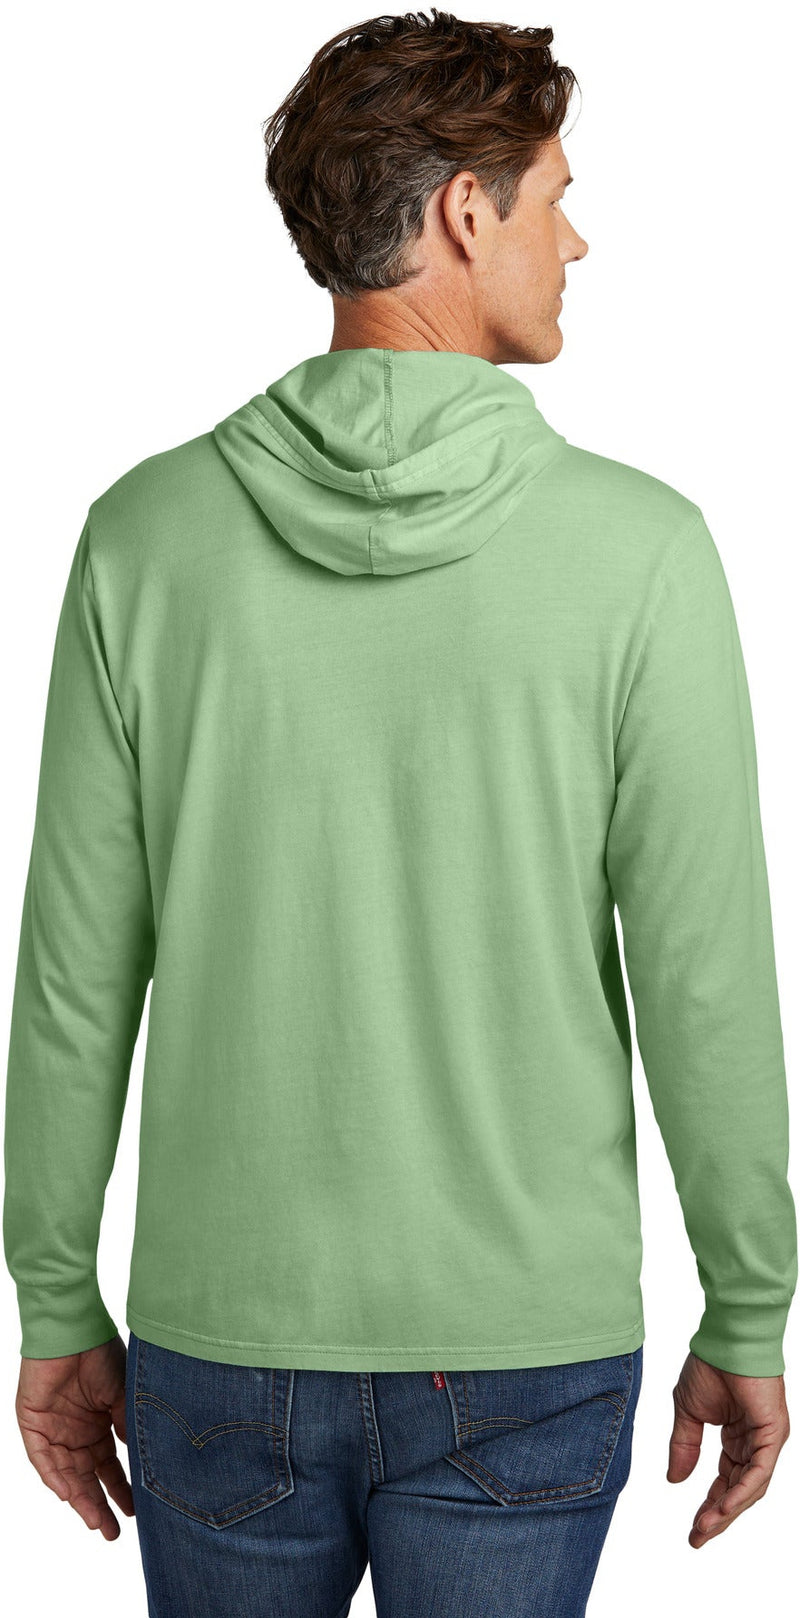 Allmade Unisex Mineral Dye Organic Cotton Hoodie Tee, Product